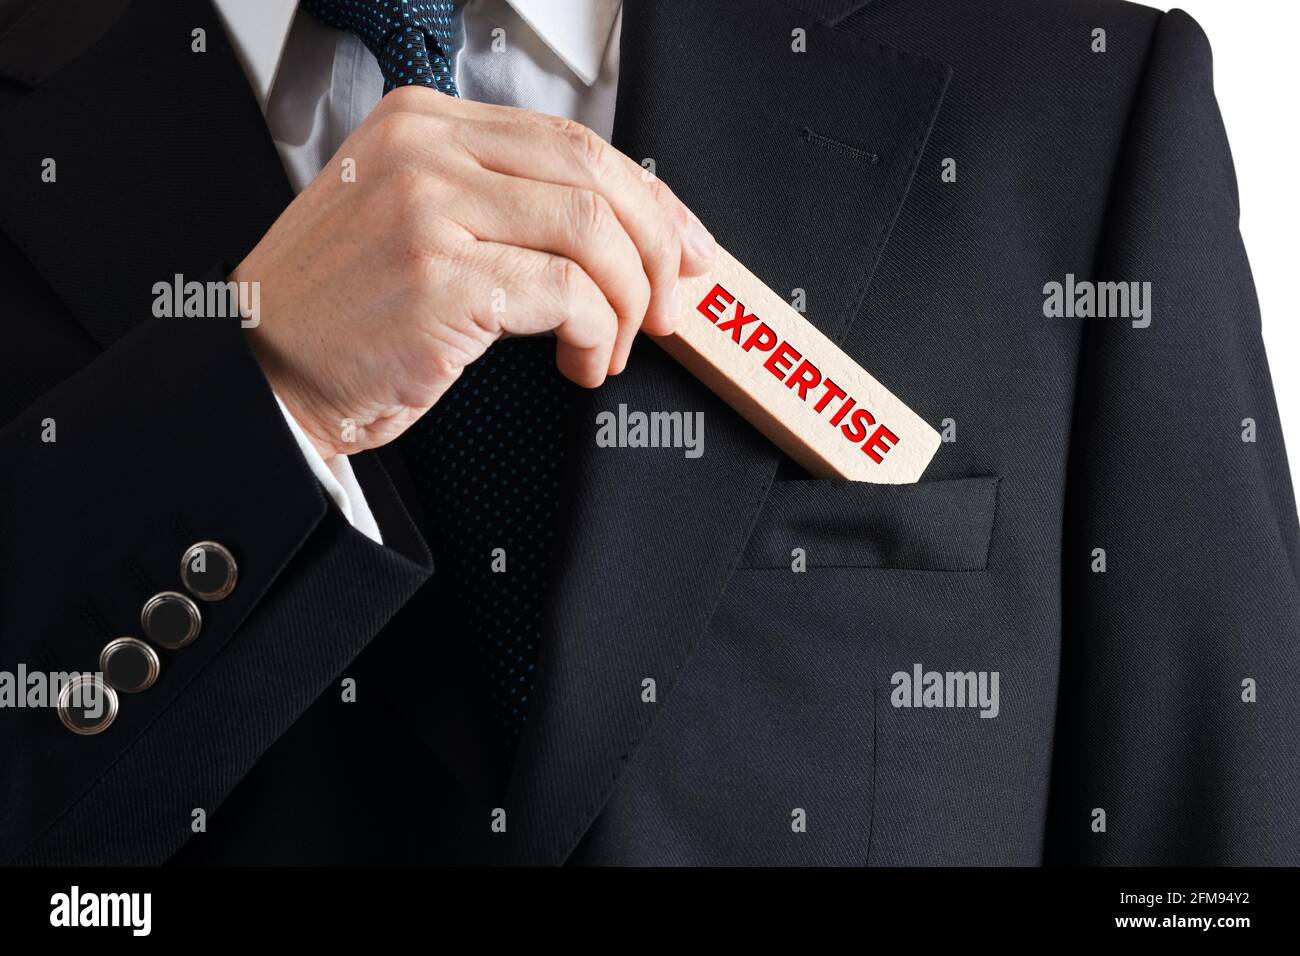 Businessman takes out a wooden block from his pocket with the word expertise. Business expert solutions consulting service concept. Stock Photo